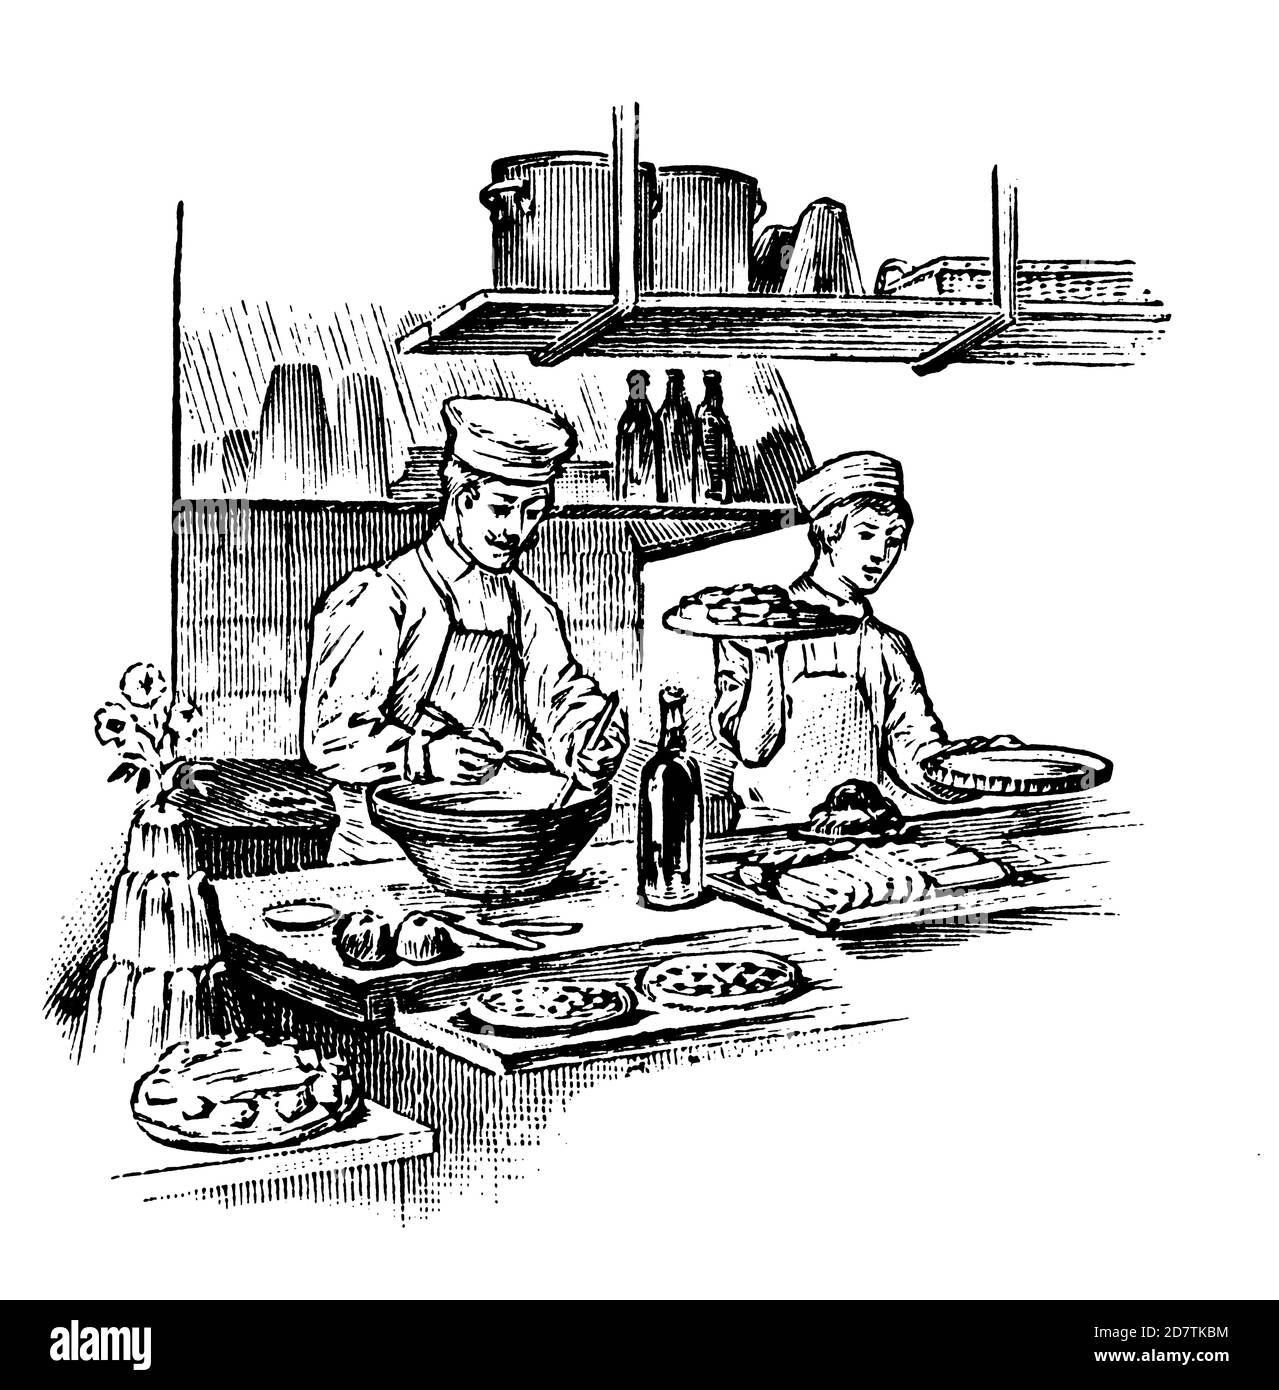 Clip art waiter Black and White Stock Photos & Images - Alamy